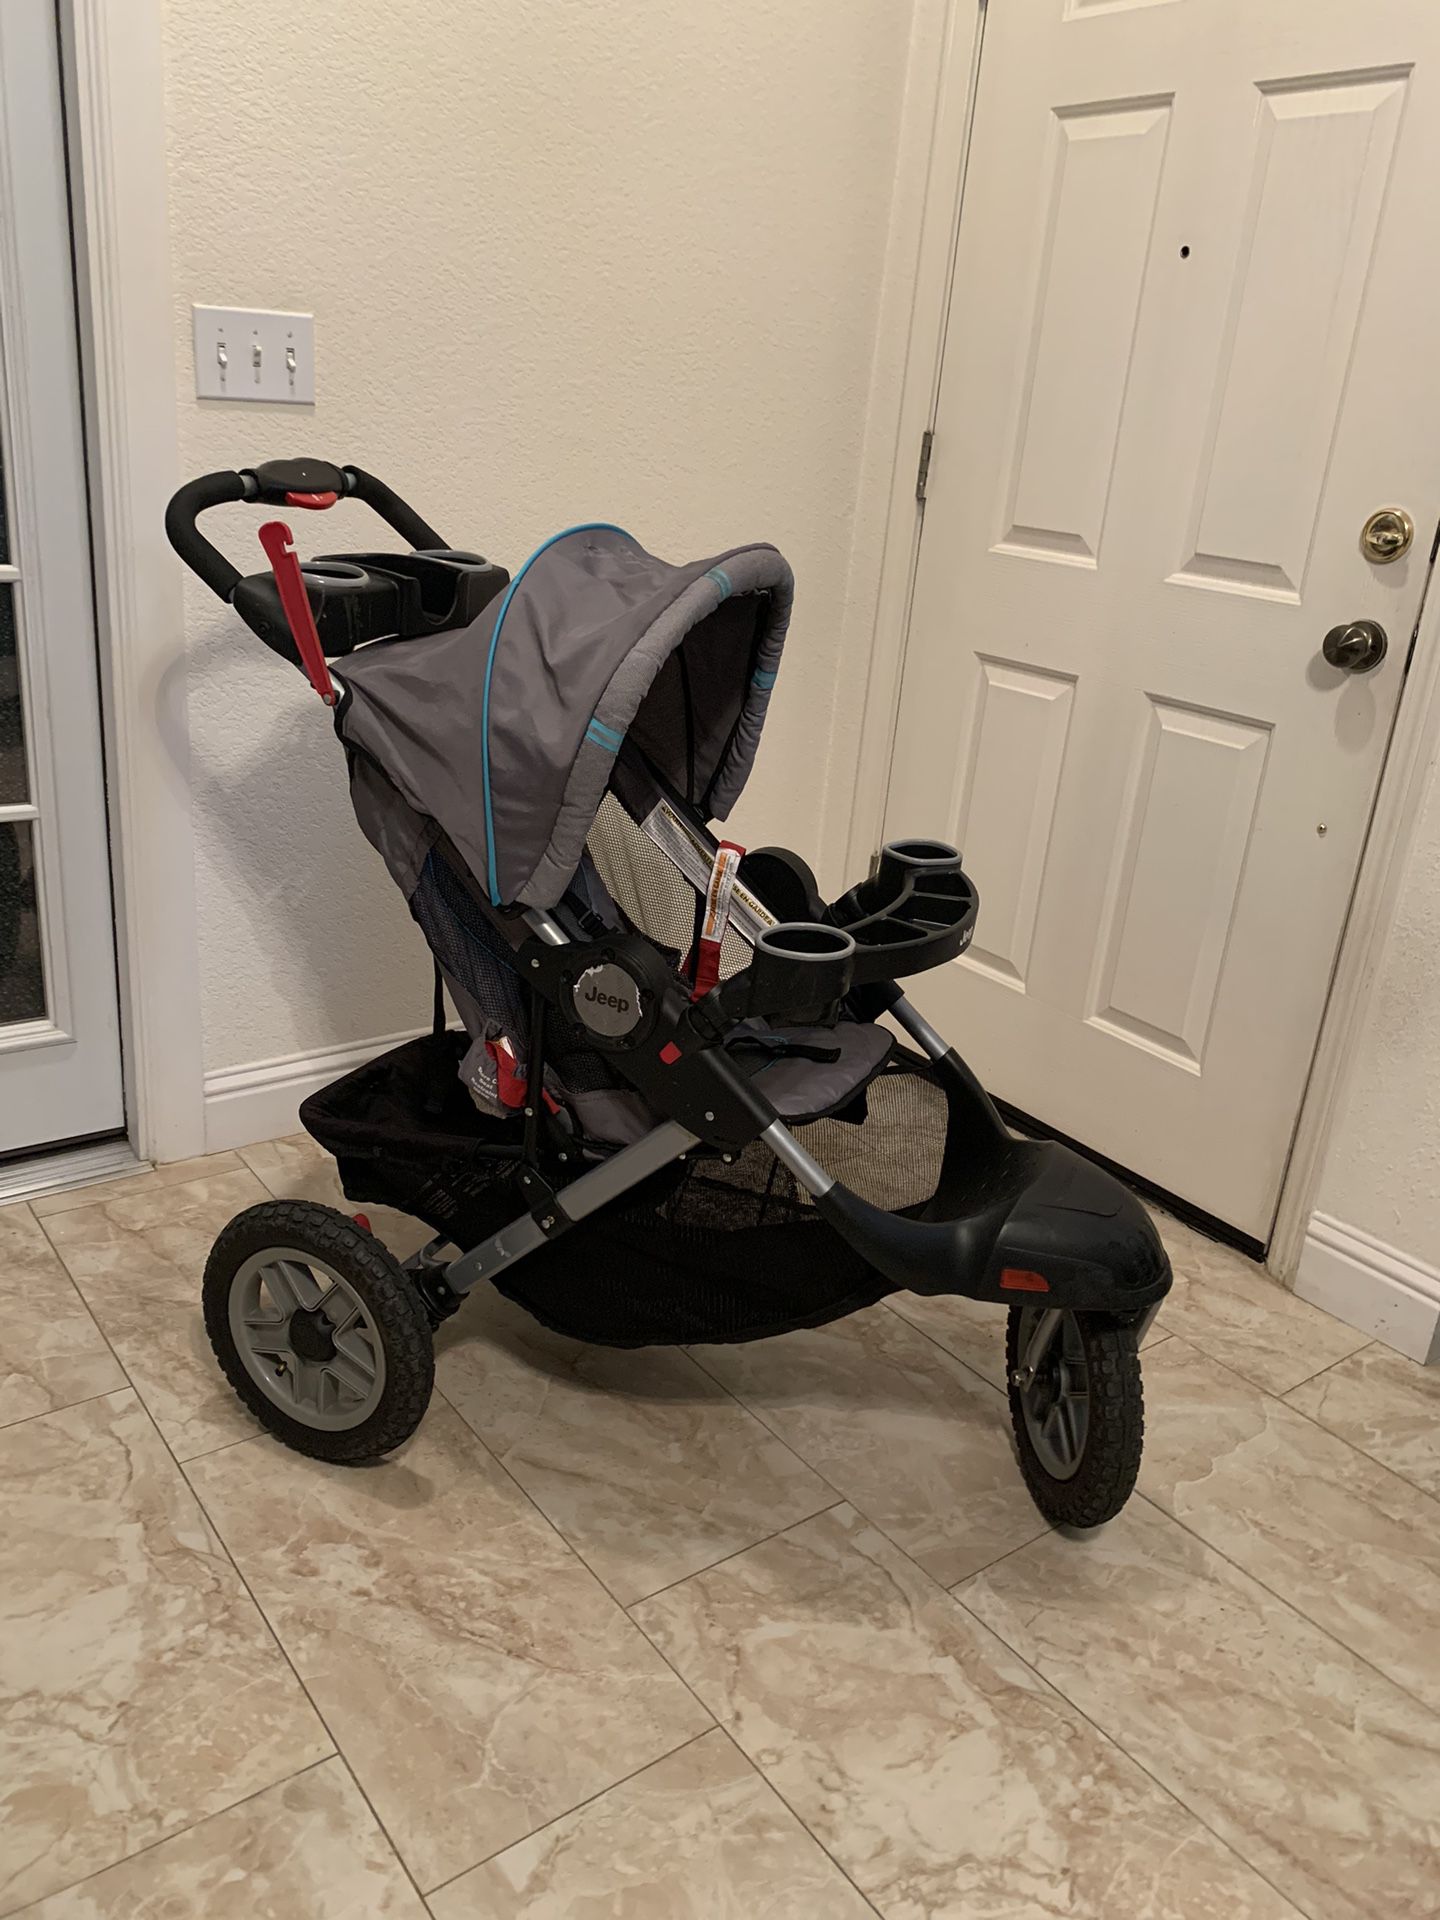 Two strollers, $30 EACH 